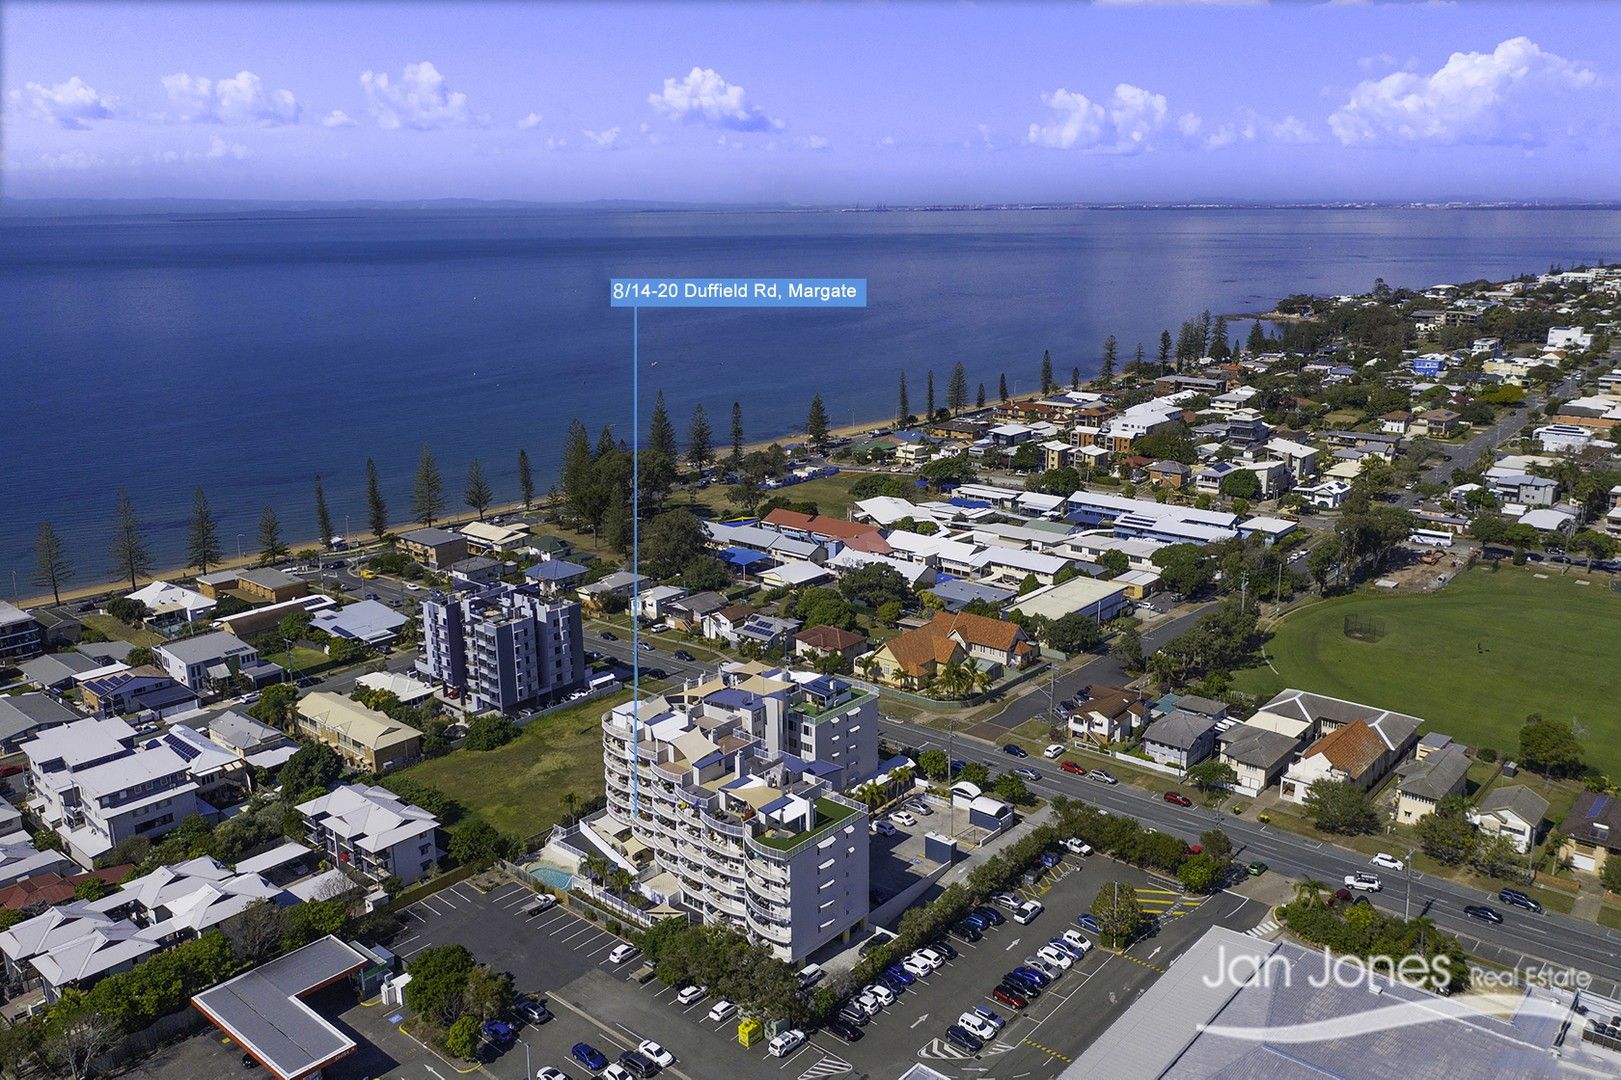 3 bedrooms Apartment / Unit / Flat in Unit 8/14-20 Duffield Rd MARGATE QLD, 4019